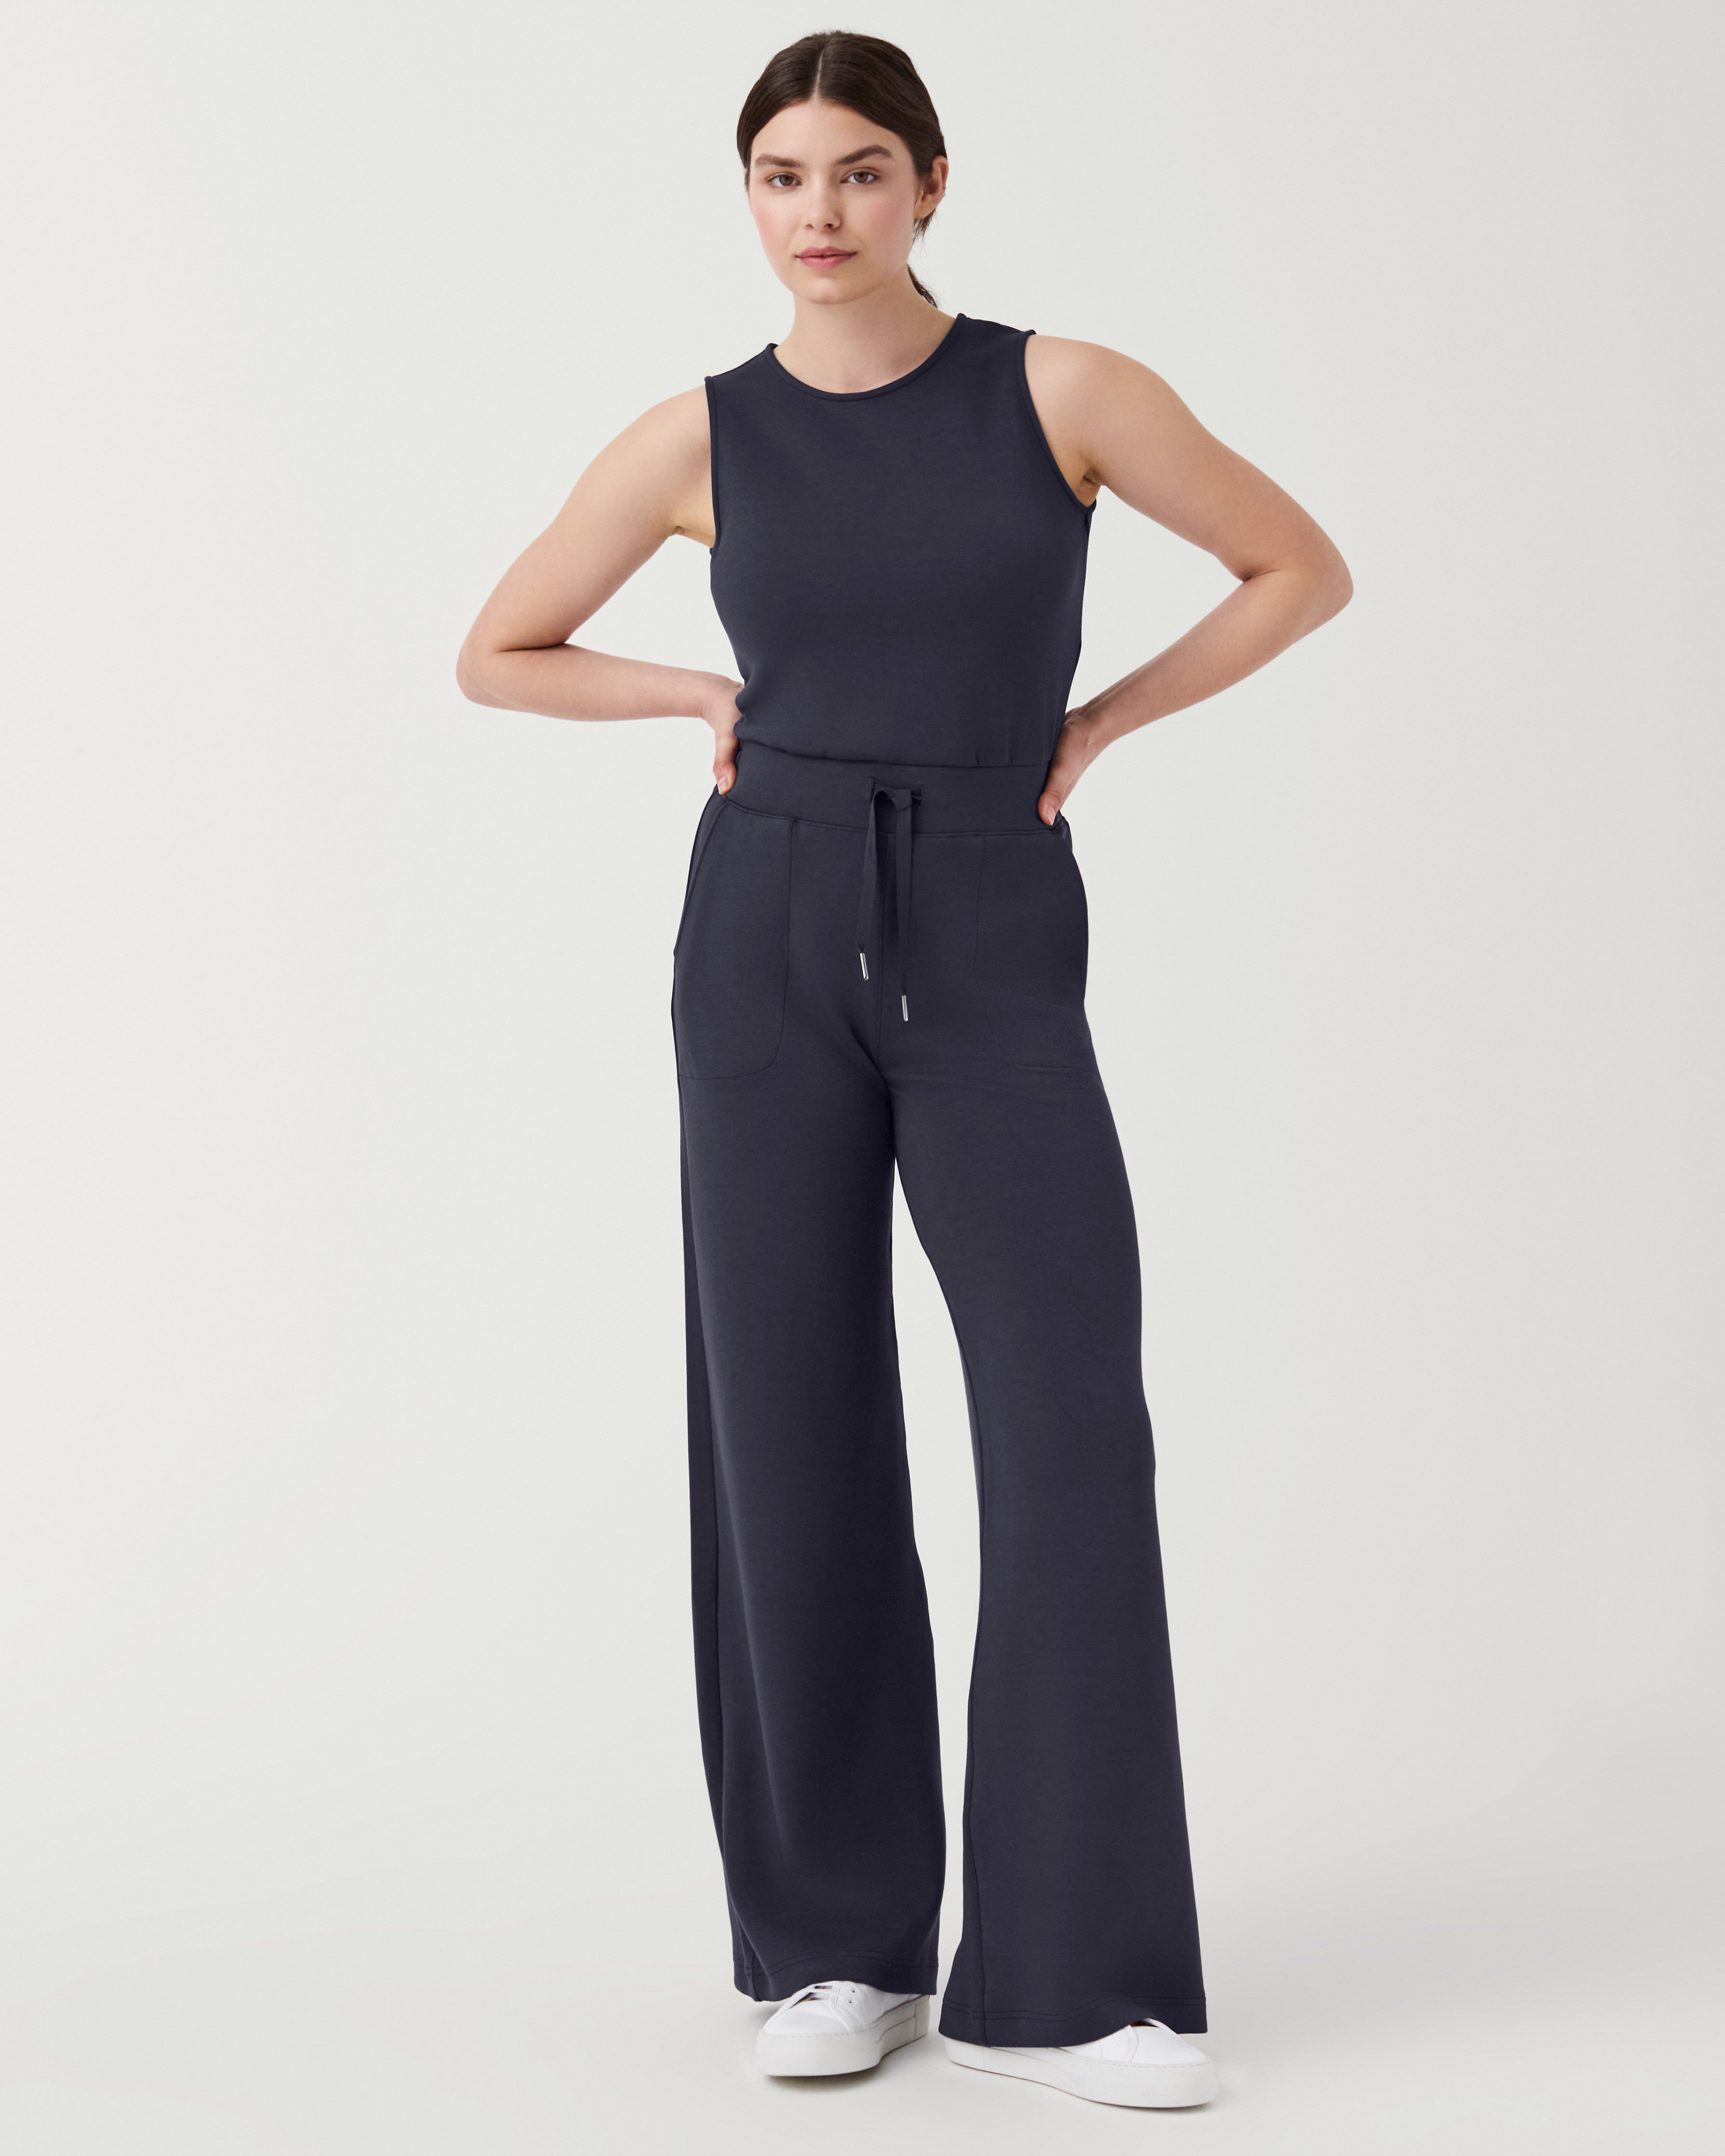 AirEssentials Sleeveless Jumpsuit for Women | SPANX